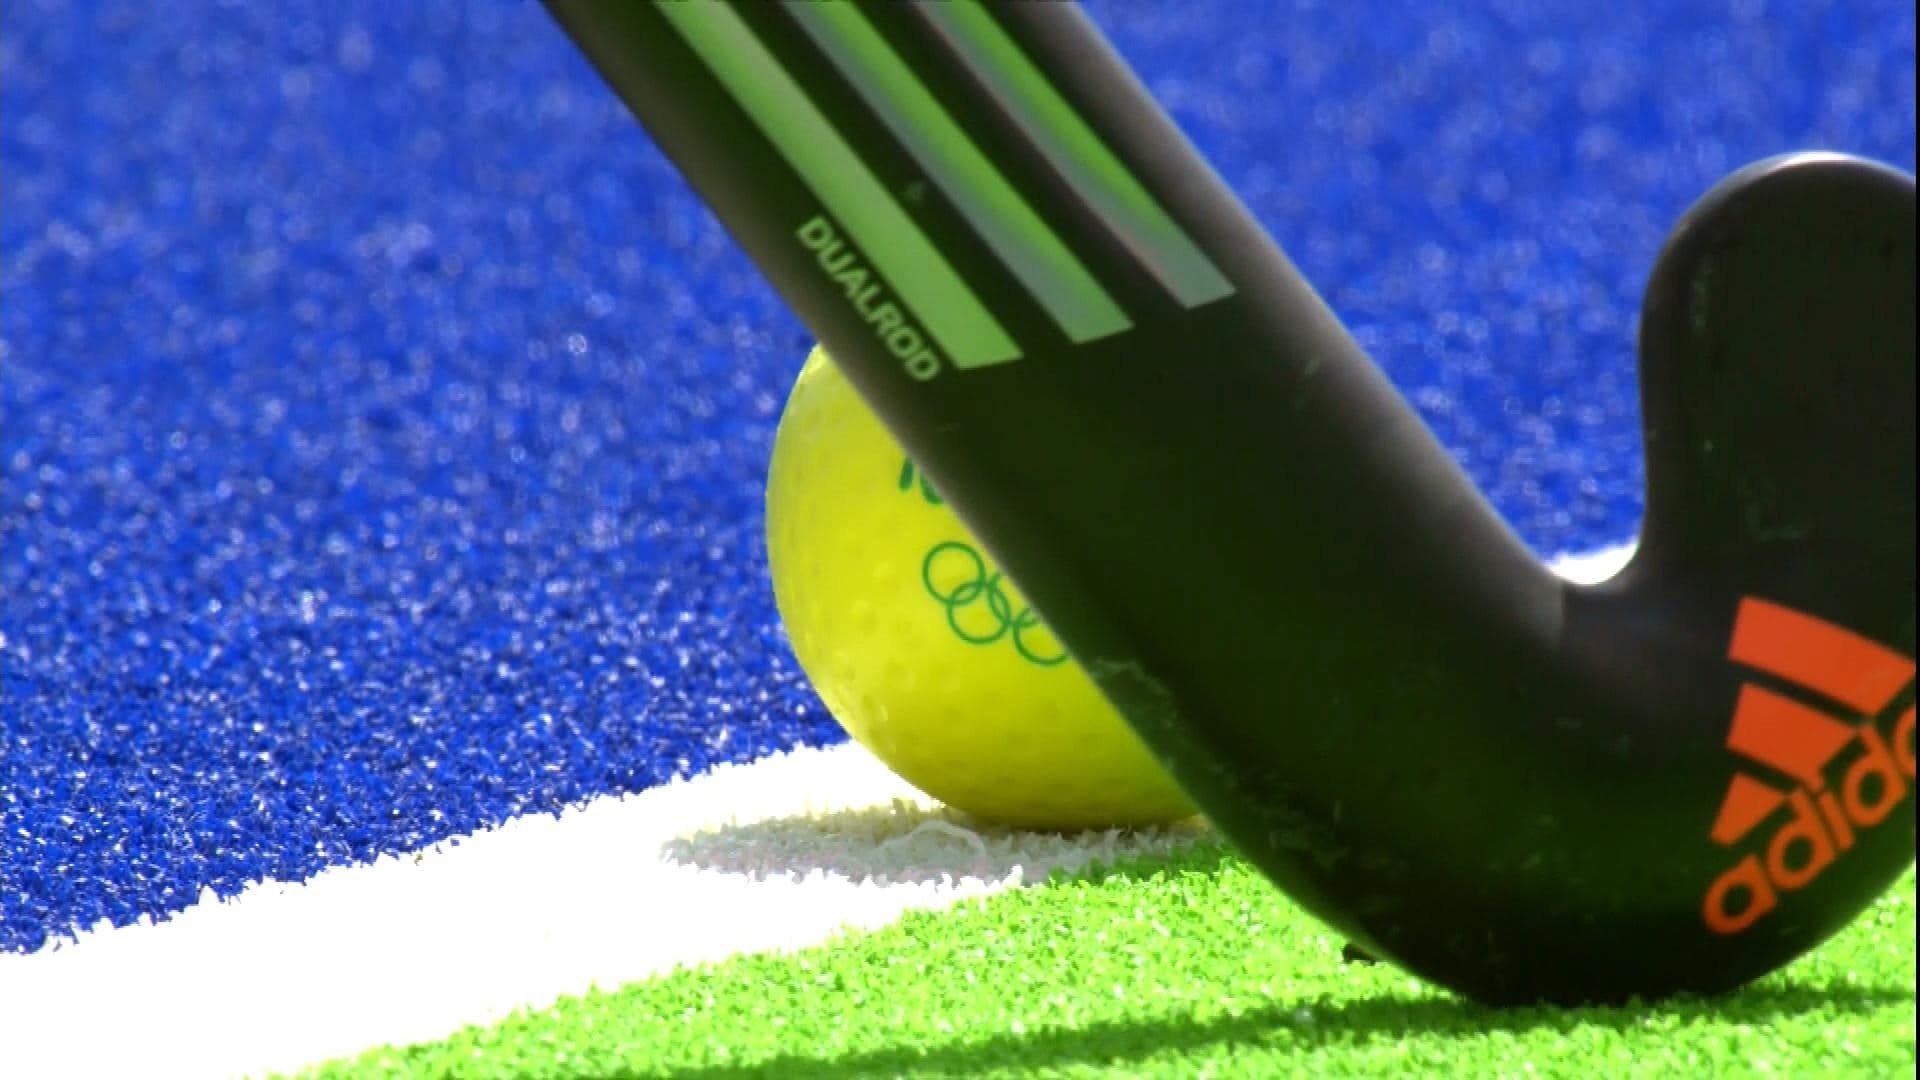 Field Hockey: A stick and an Olympic-style ball - equipment for a competitive ball game. 1920x1080 Full HD Background.